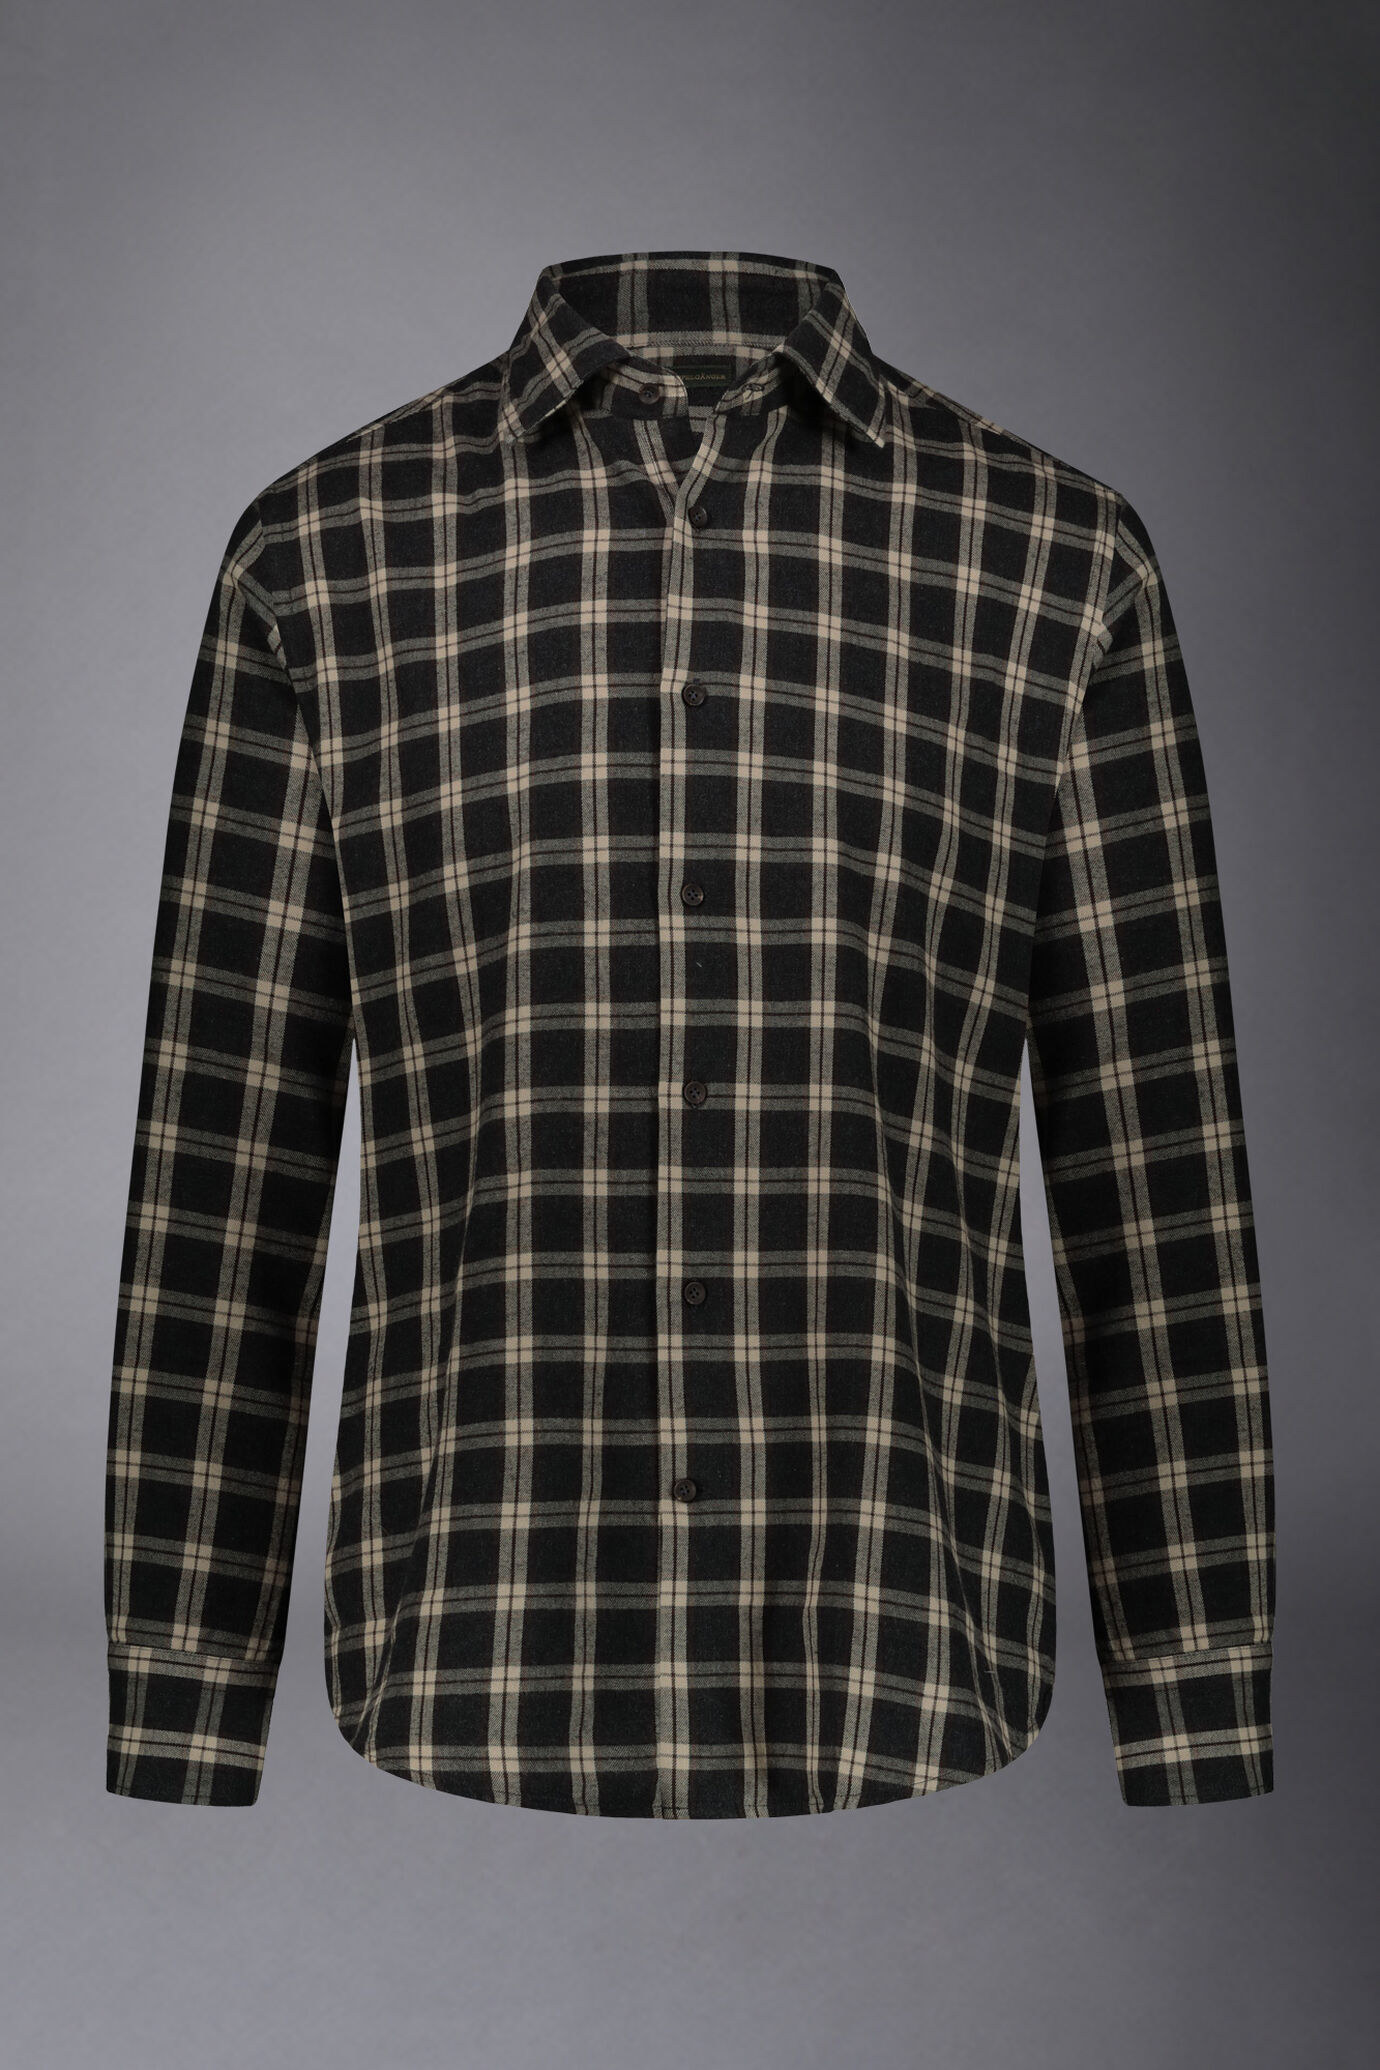 Men's casual french collar comfort fit shirt flannel fabric checked pattern image number 4